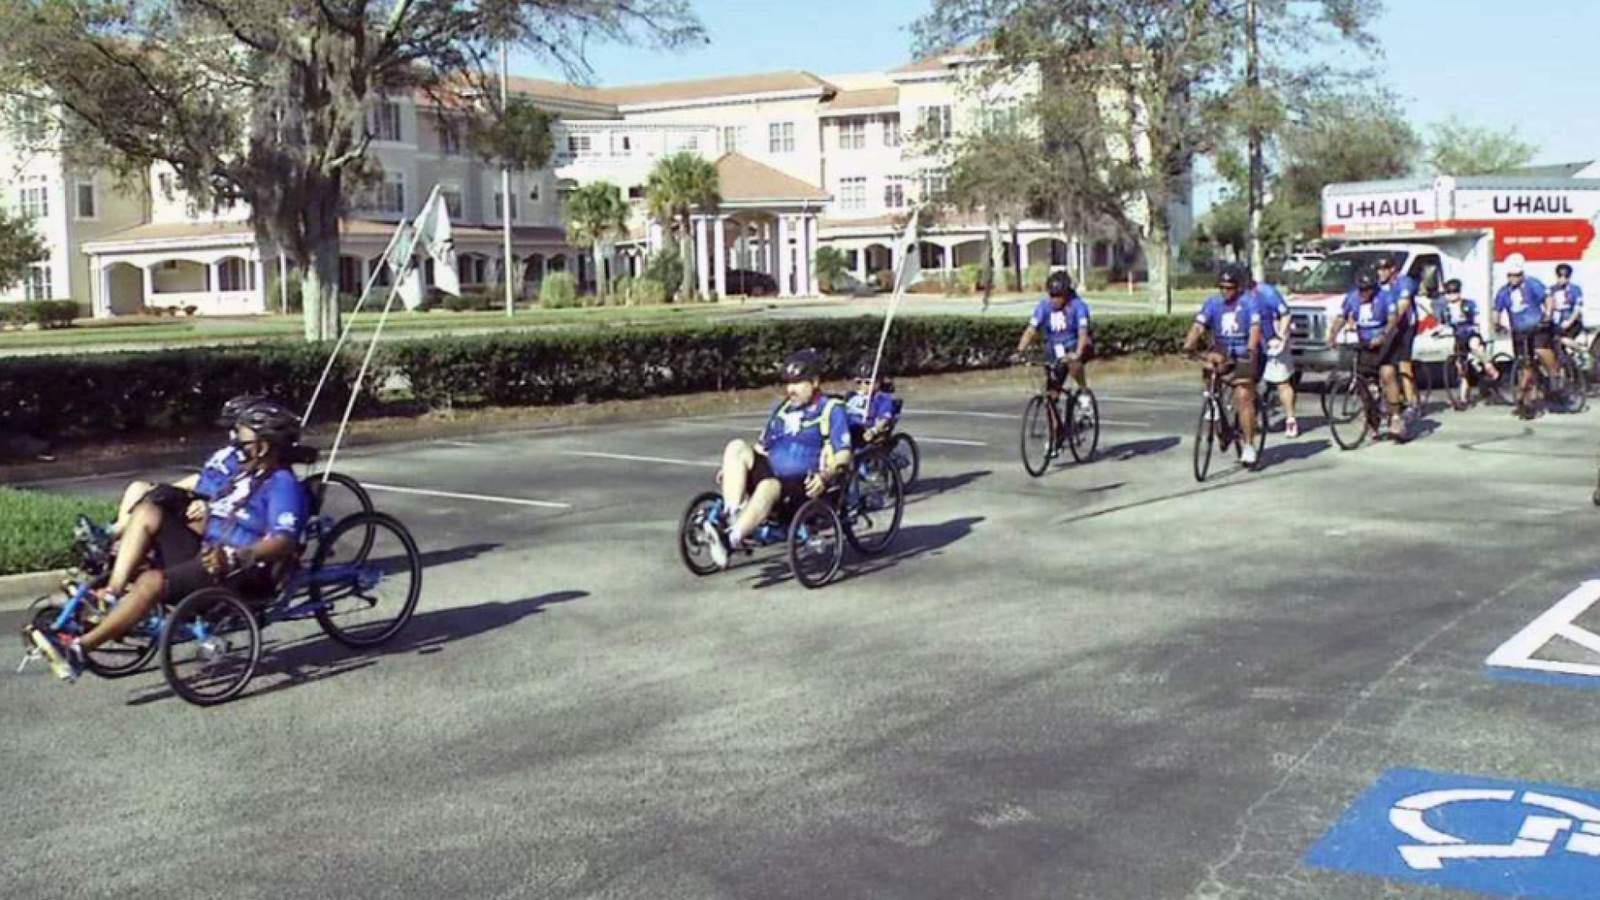 Wounded warriors ride for recovery